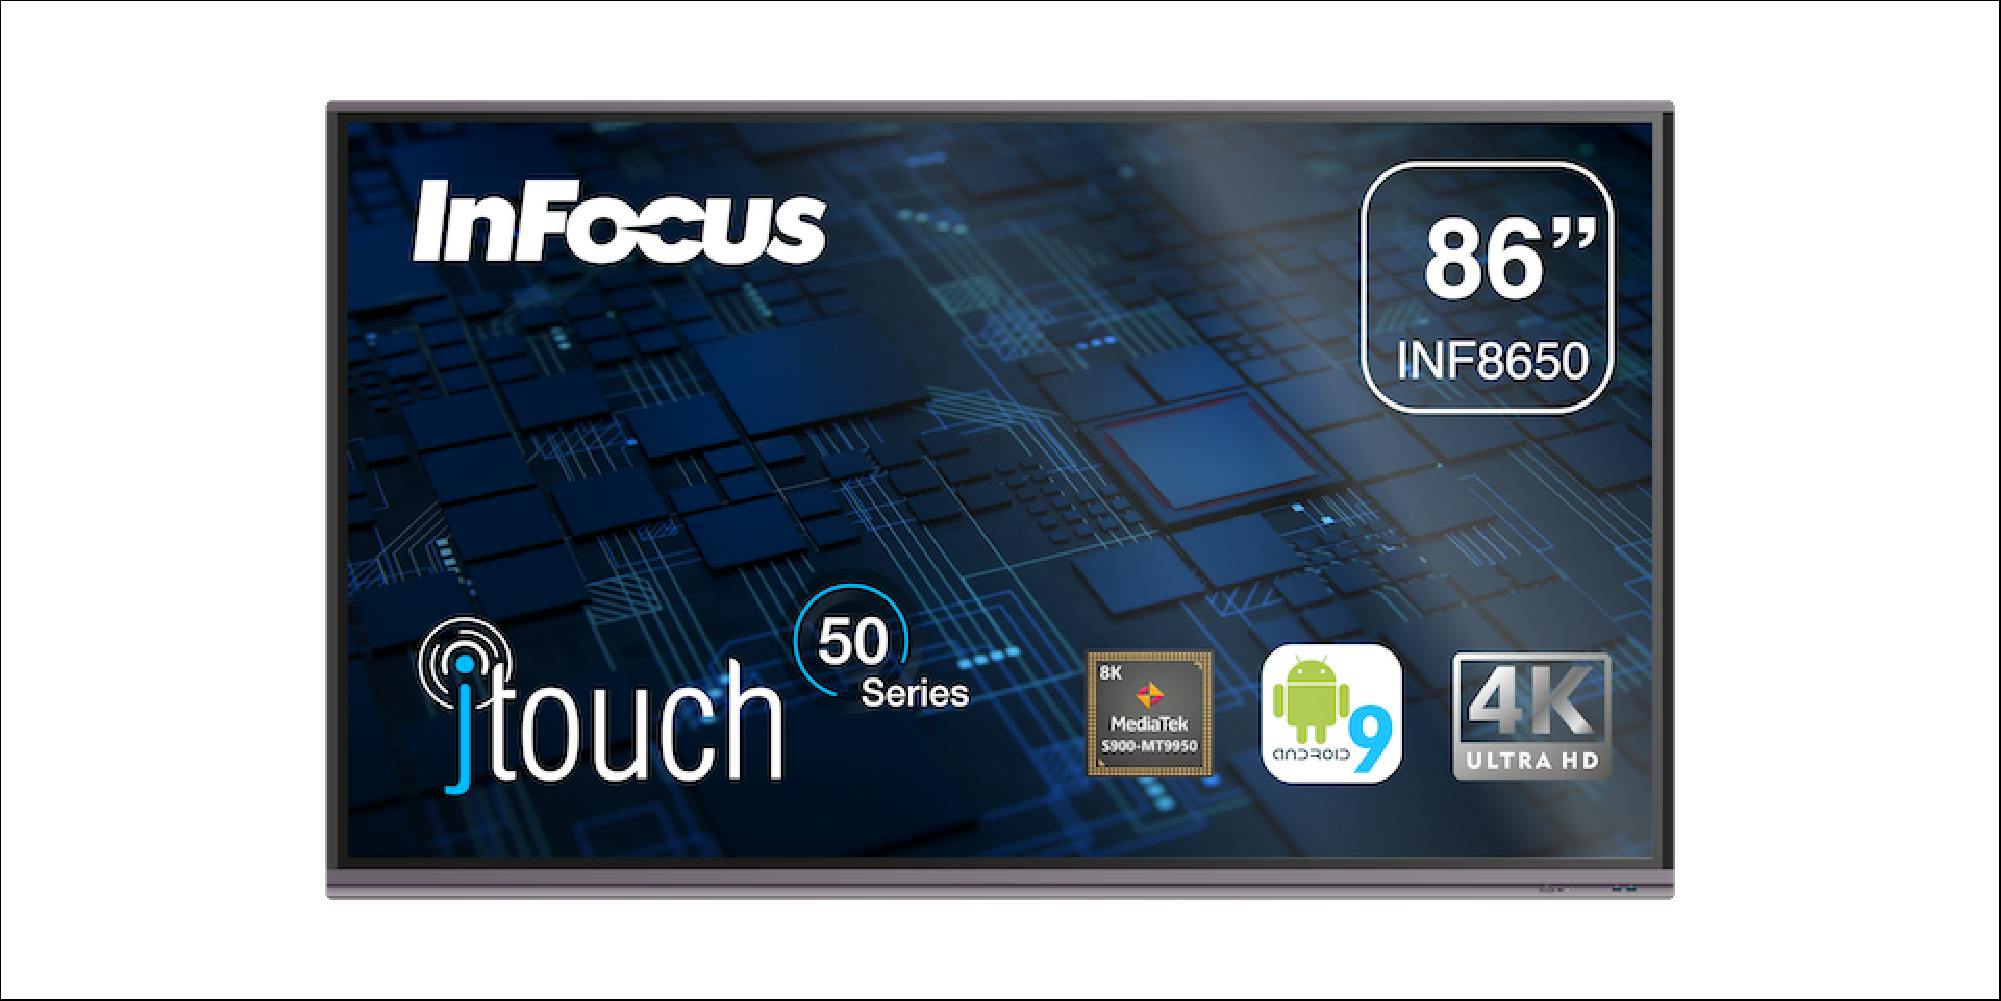 JTouch Series 50 - INF8650